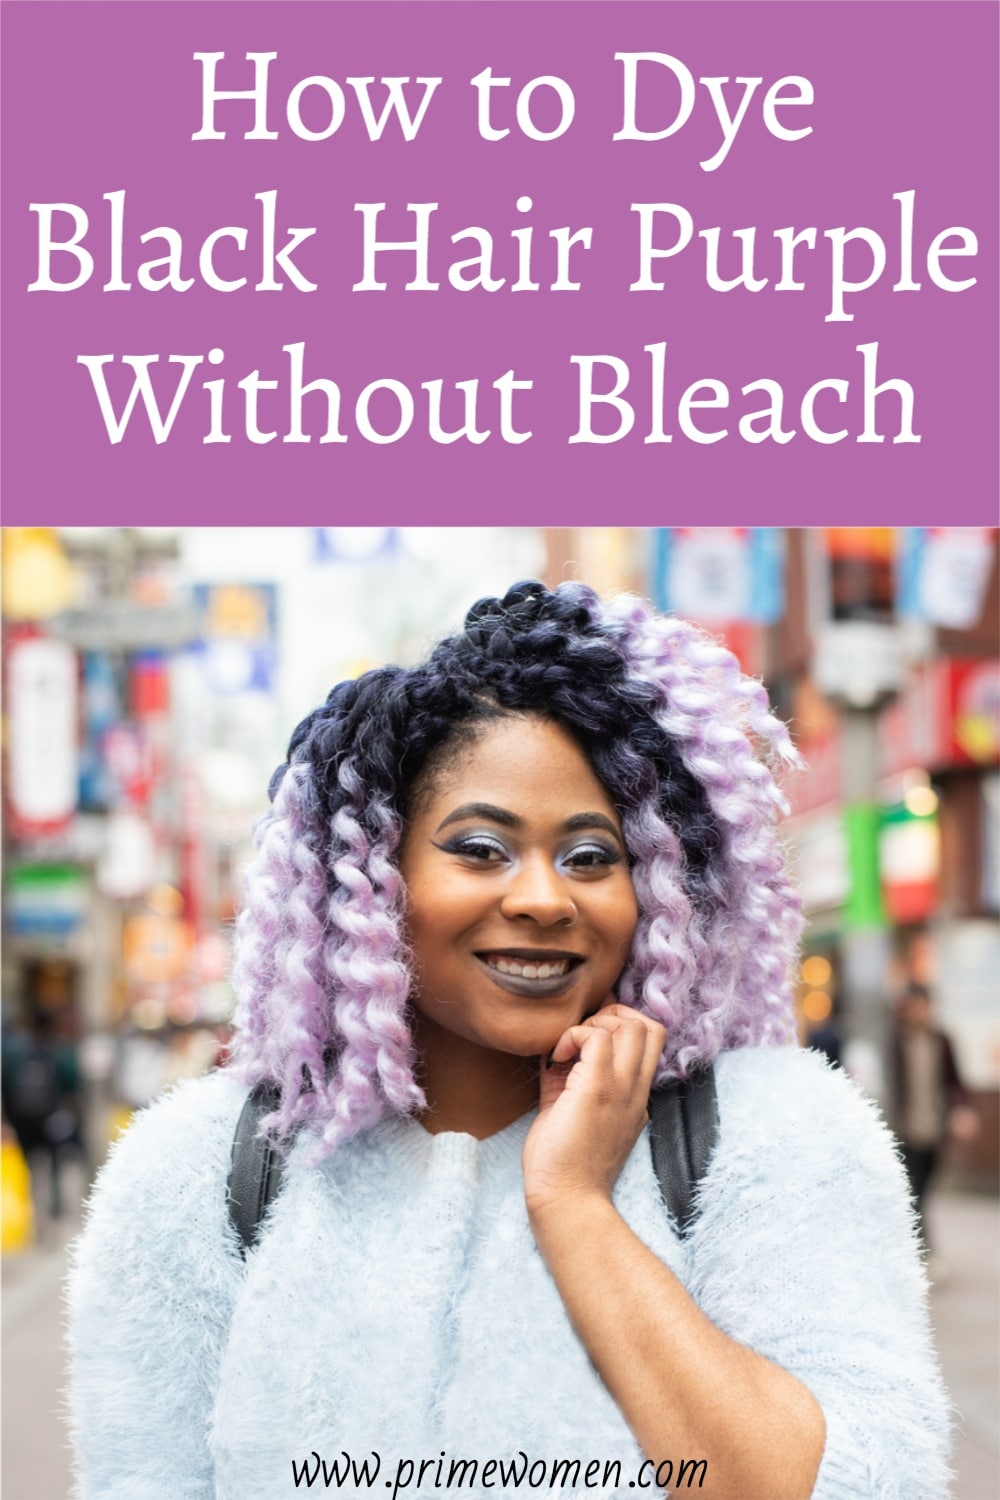 How to dye black hair purple without bleach